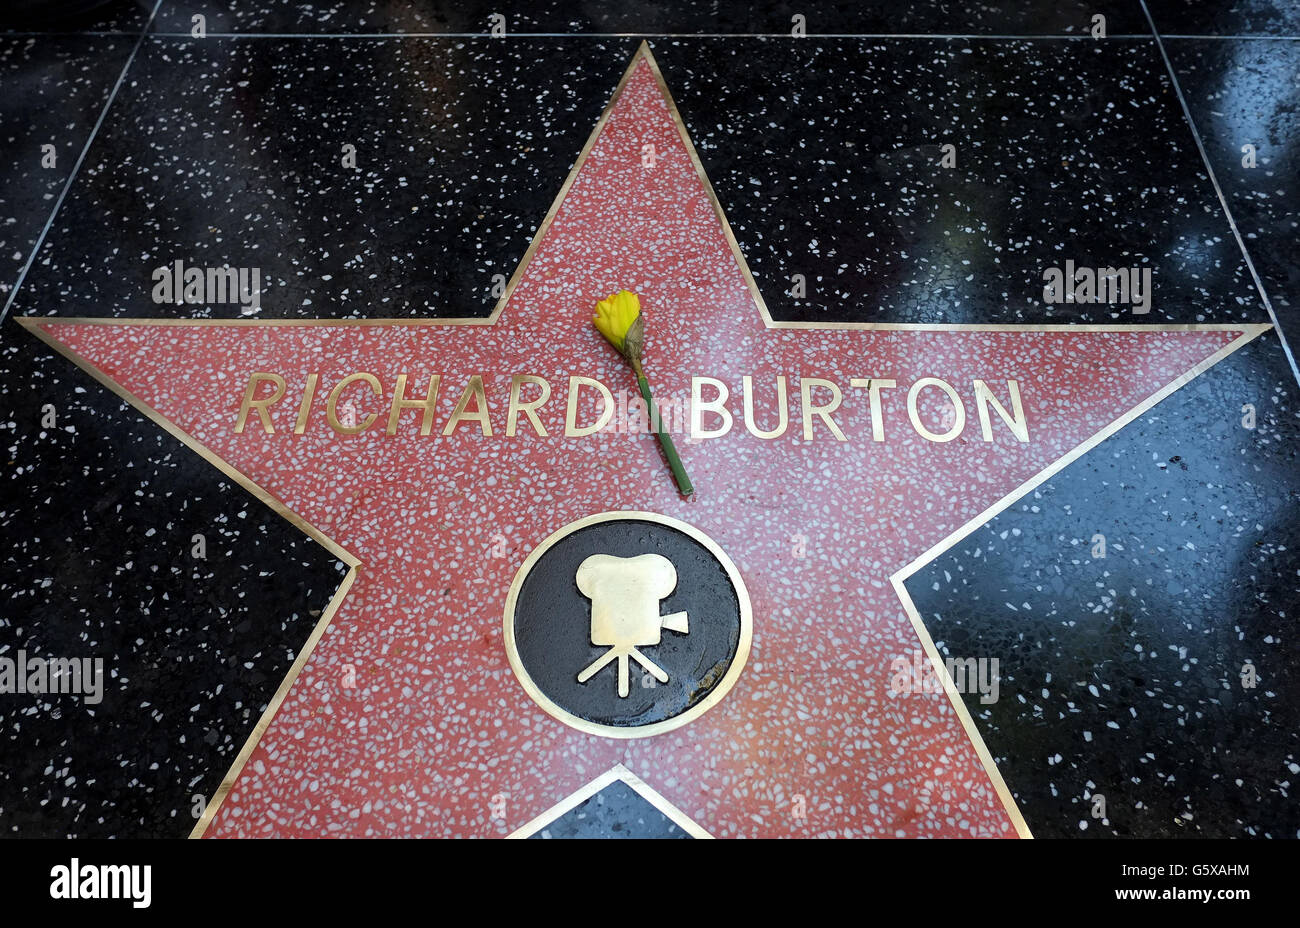 The late Richard Burton is honored with a star on the Hollywood Walk of Fame, Los Angeles, United States, next to that of Elizabeth Taylor. Stock Photo